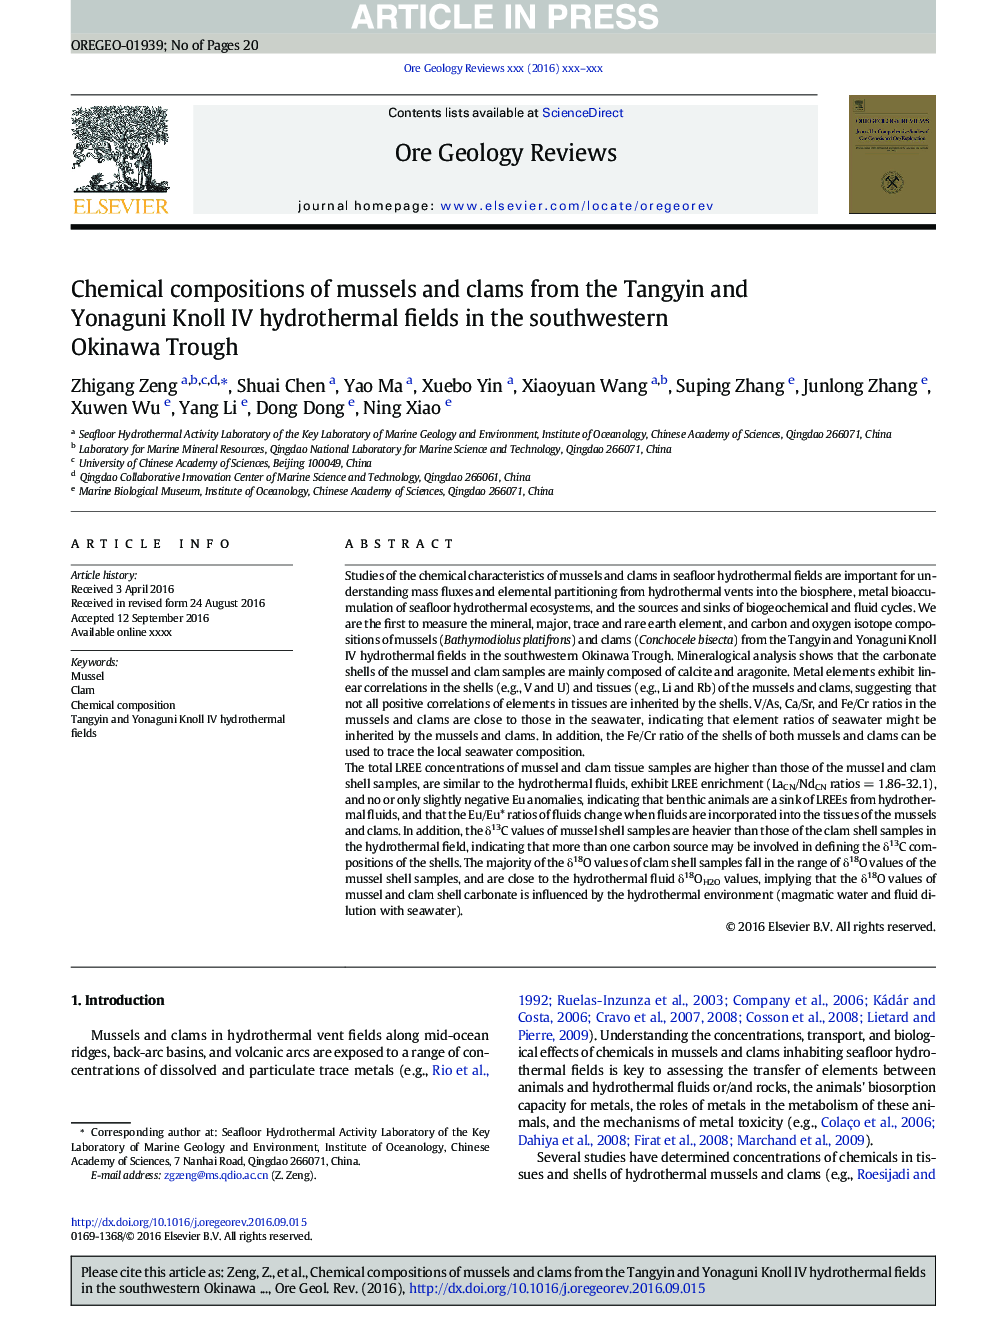 Chemical compositions of mussels and clams from the Tangyin and Yonaguni Knoll IV hydrothermal fields in the southwestern Okinawa Trough